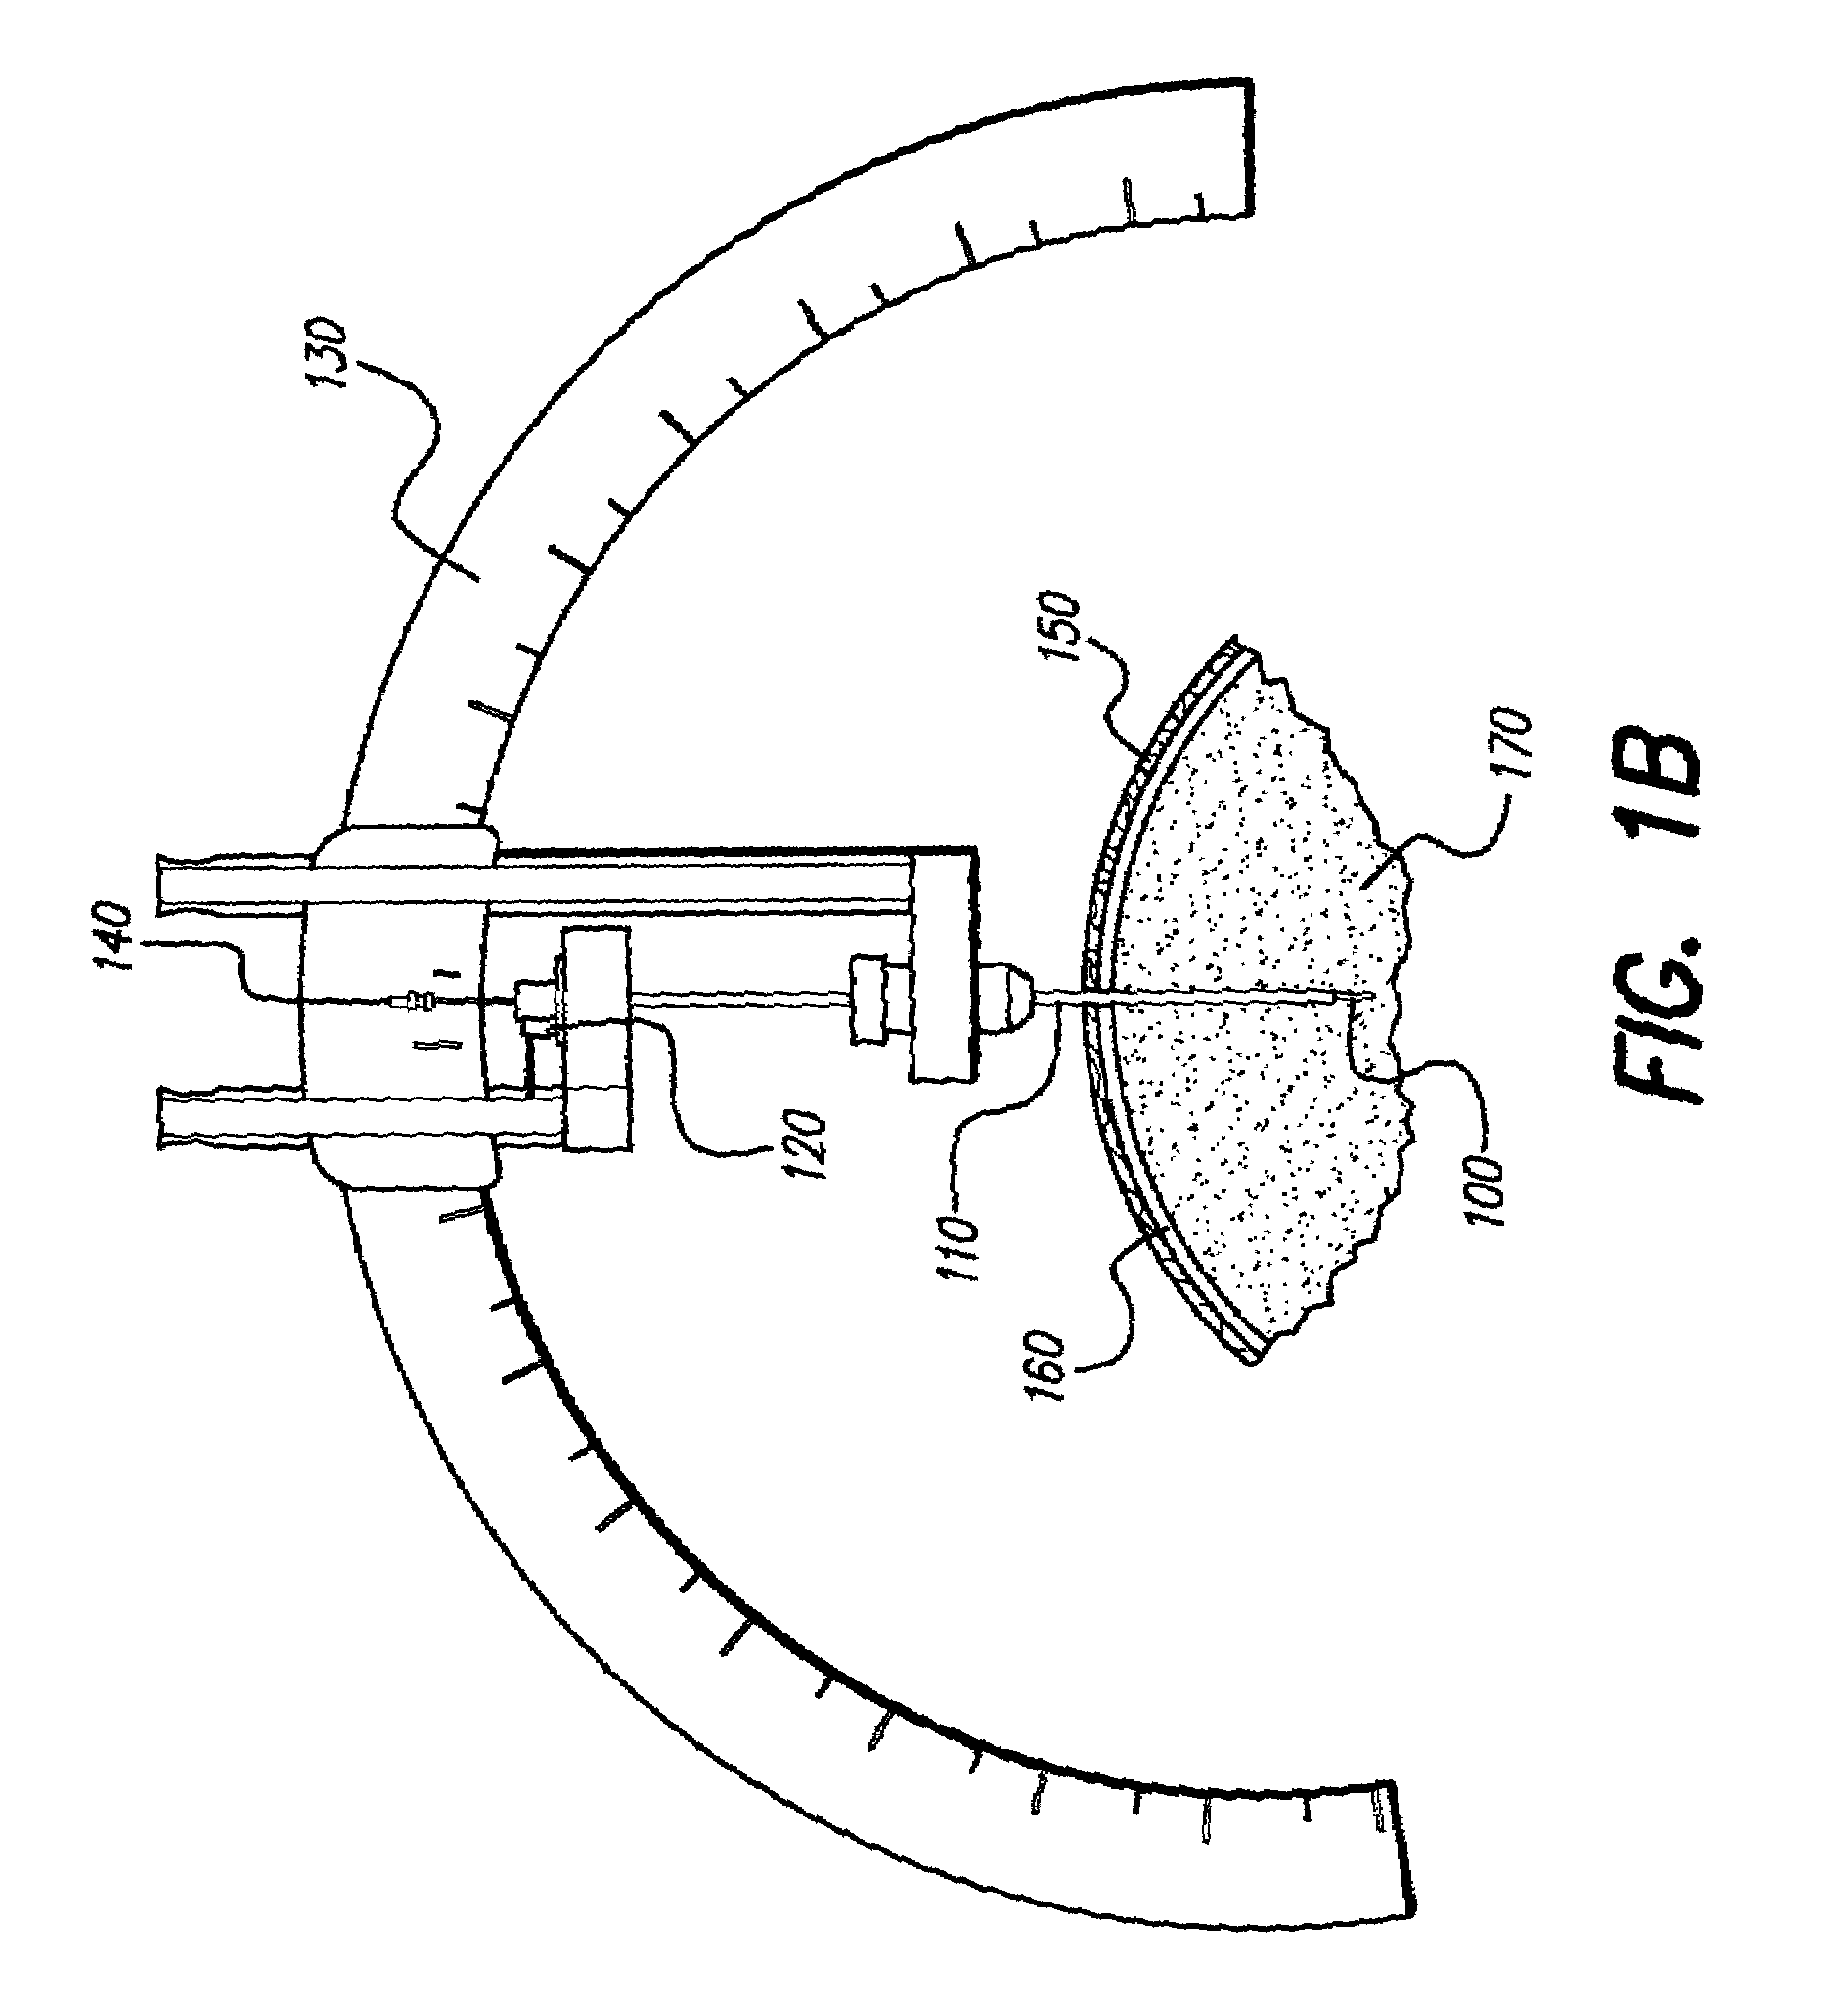 System and method for insertion of a device into the brain